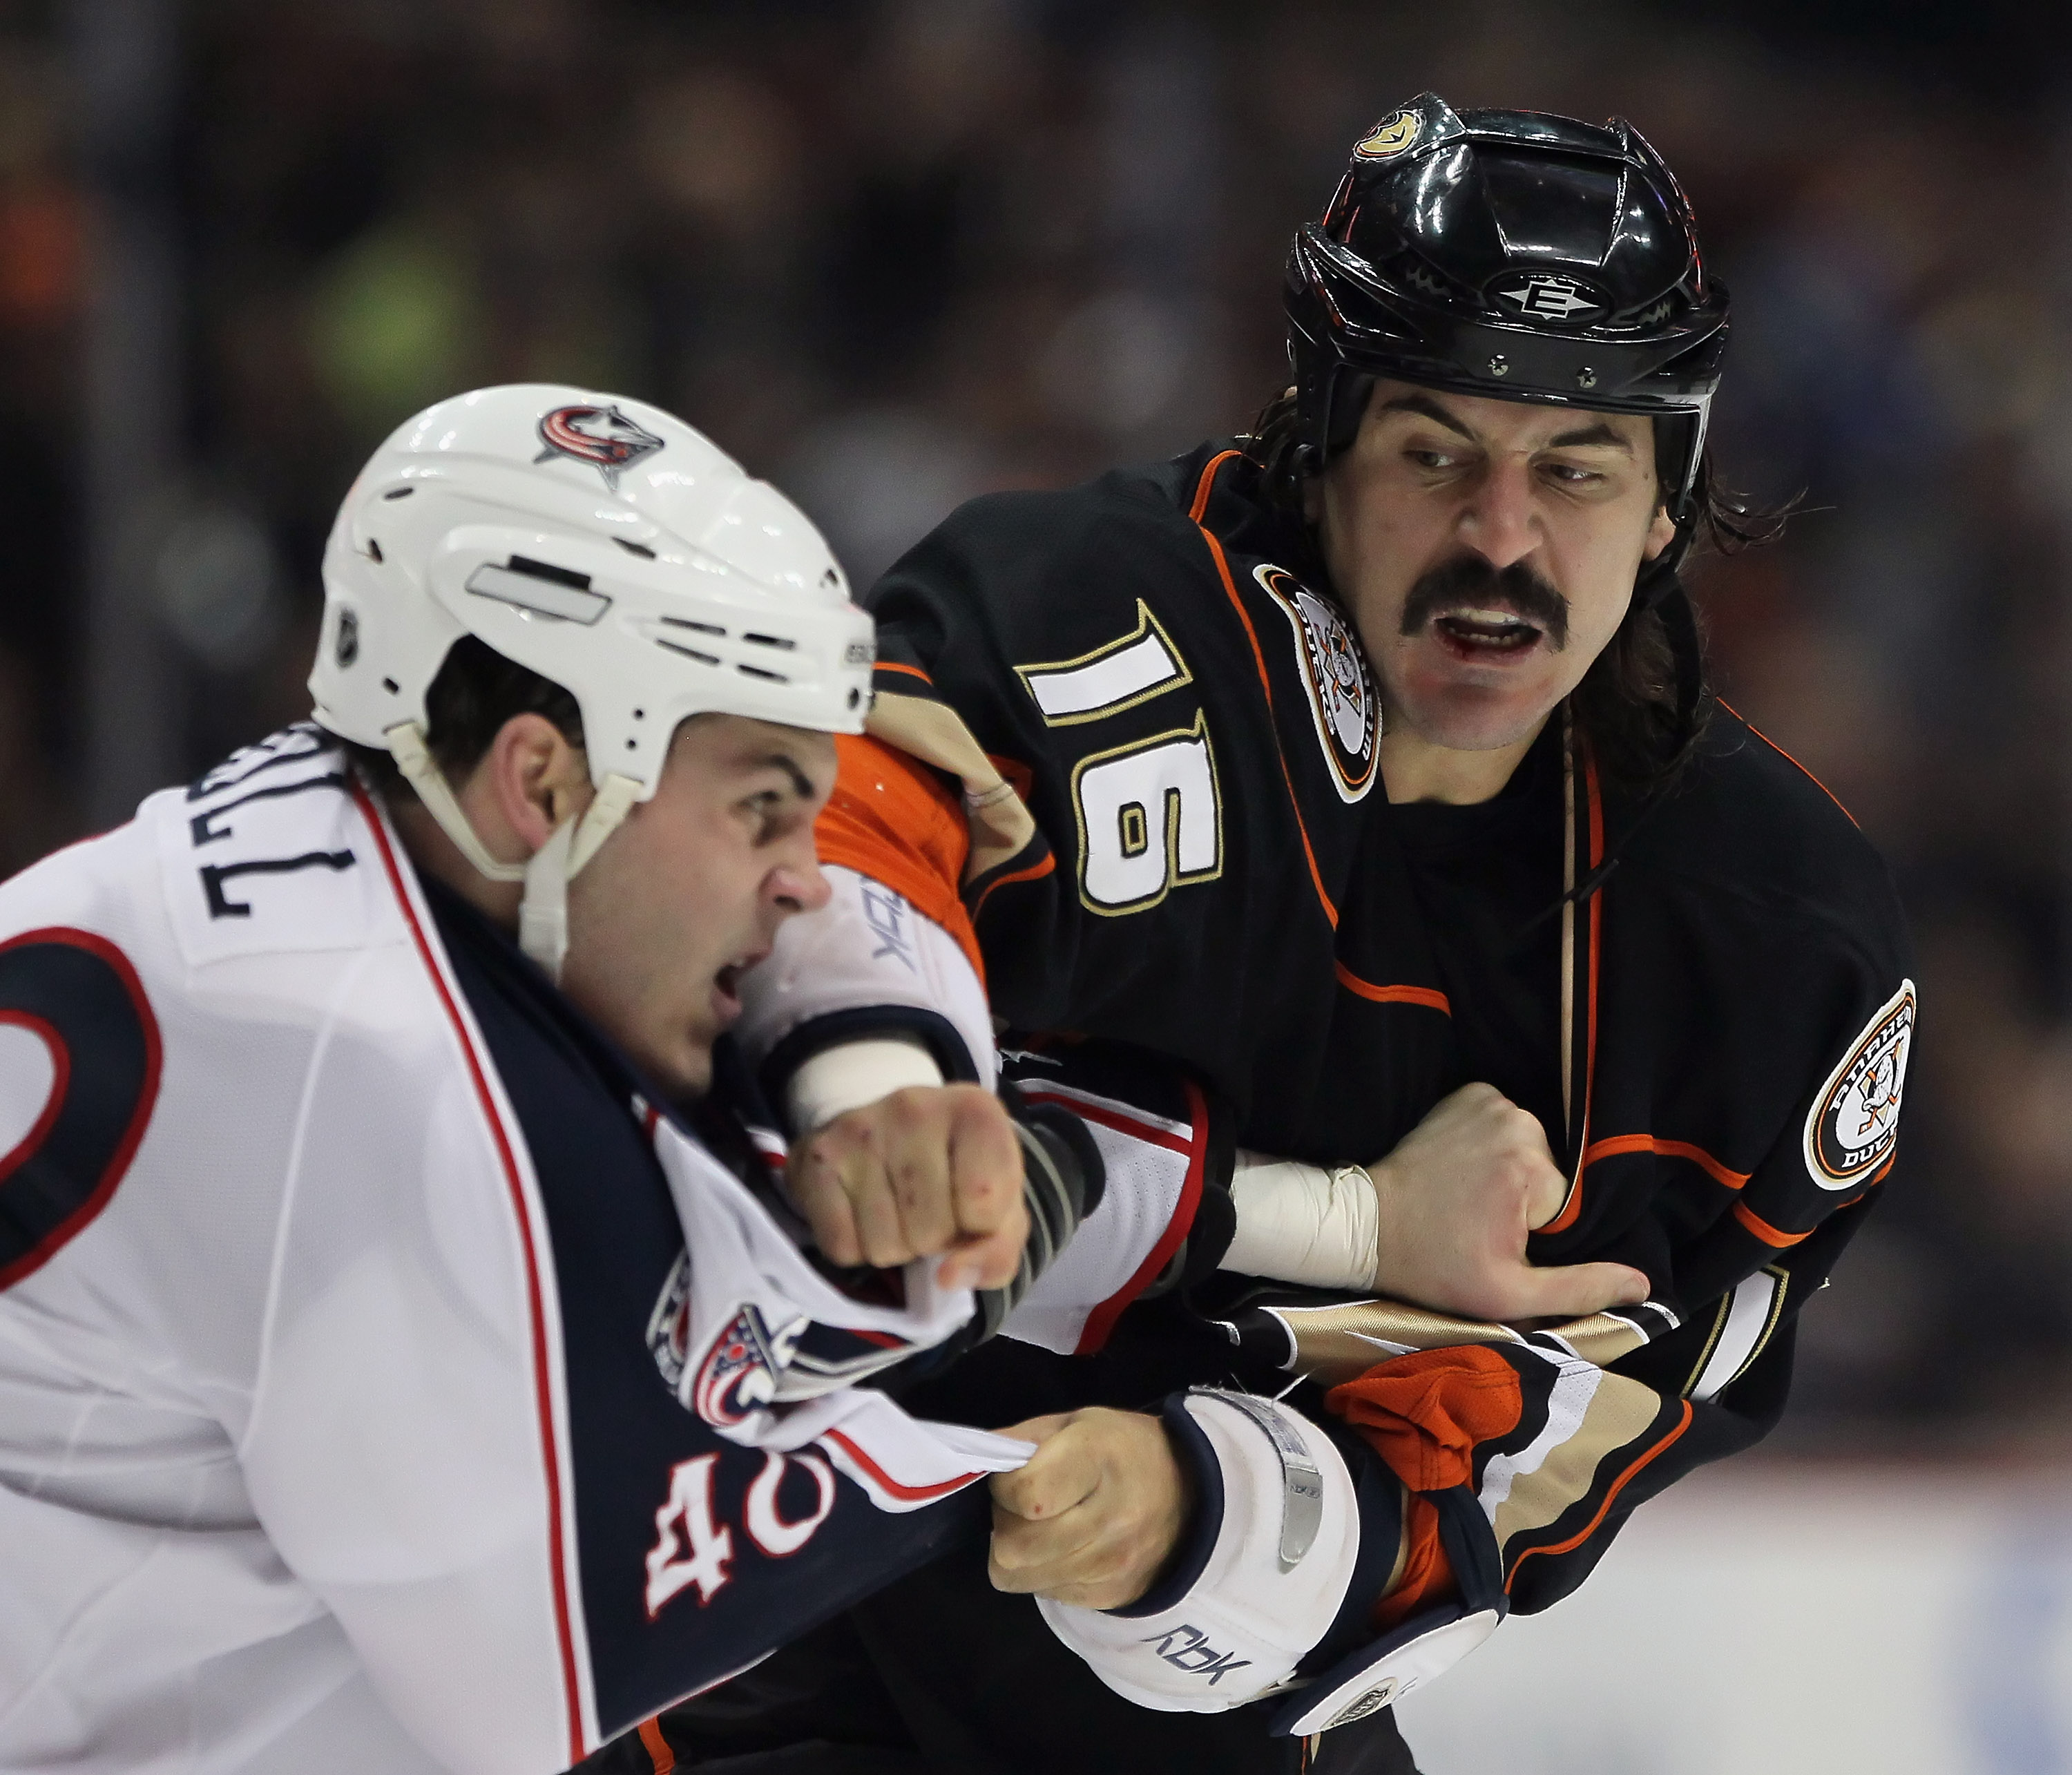 ANAHEIM, CA - JANUARY 07:  George Parros #16 of the Anaheim Ducks throws a punch at Jared Boll #40 of the Columbus Blue Jackets in the first period at the Honda Center on January 7, 2011 in Anaheim, California.  (Photo by Jeff Gross/Getty Images)